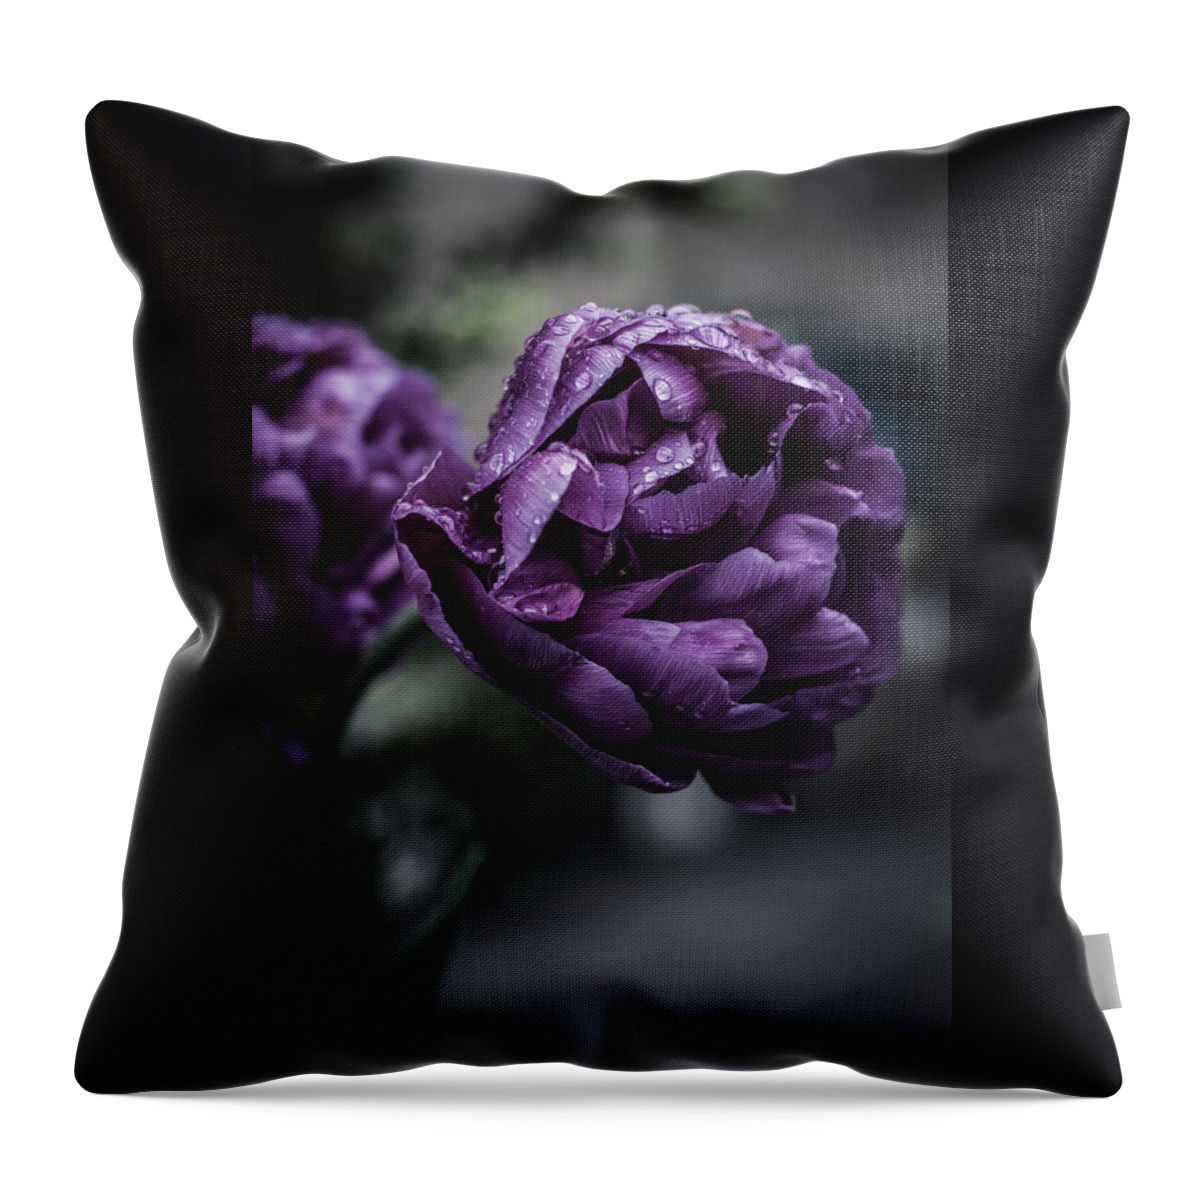 Macro Throw Pillow featuring the photograph Sensational Dreams by Miguel Winterpacht